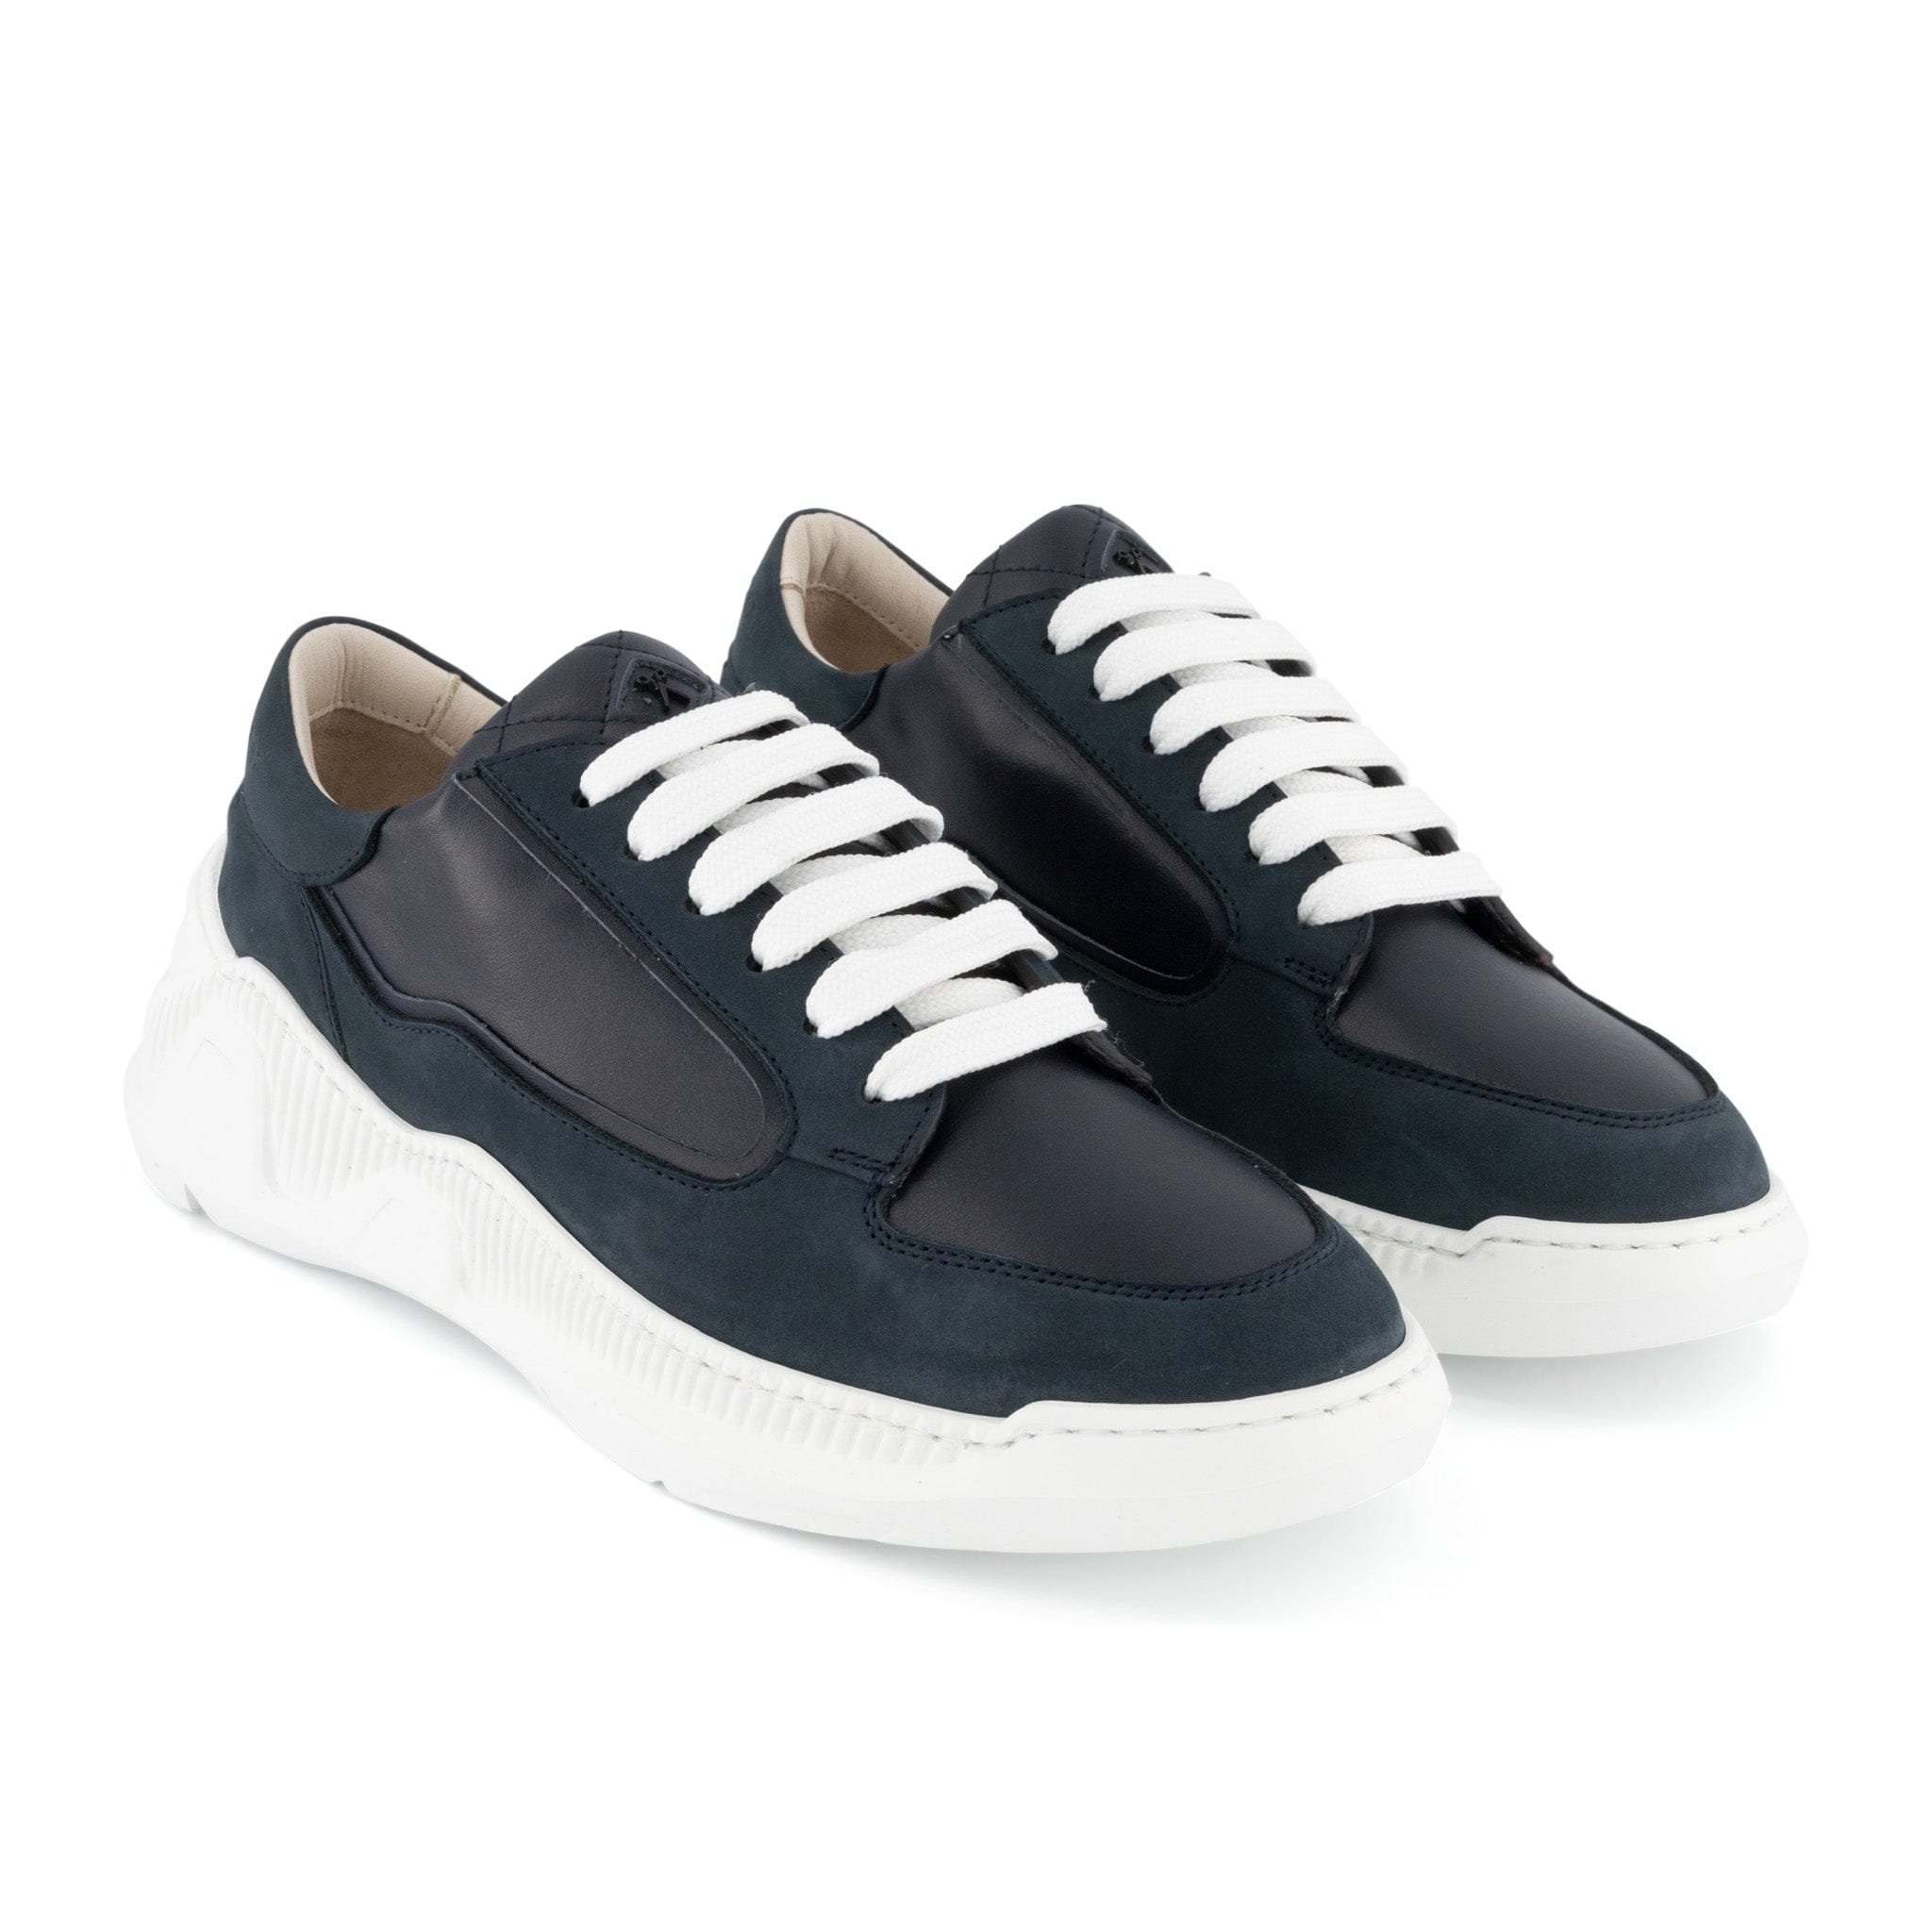 Nesto Low Top Italian Leather Sneaker - All Navy | White Outsole | Made in Italy